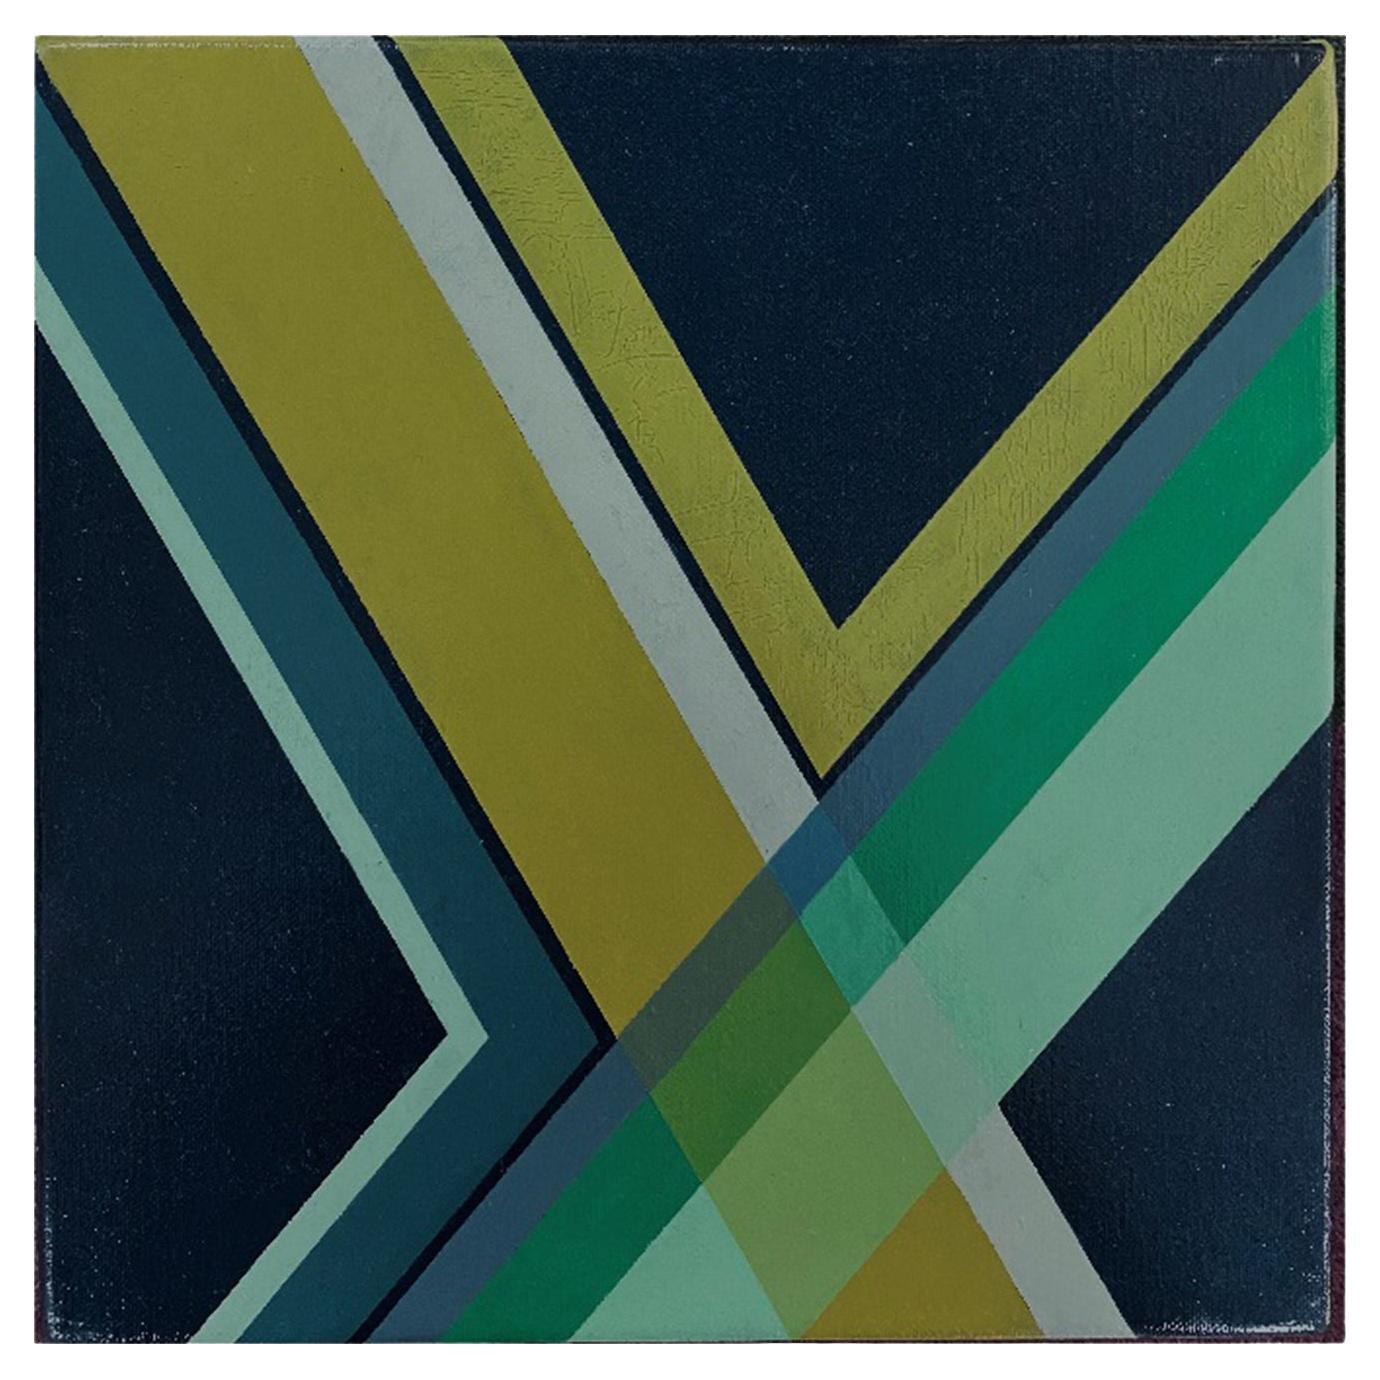  Painting "Composition Green" 2010 Geometric Modern Canvas by Cecilia Setterdahl